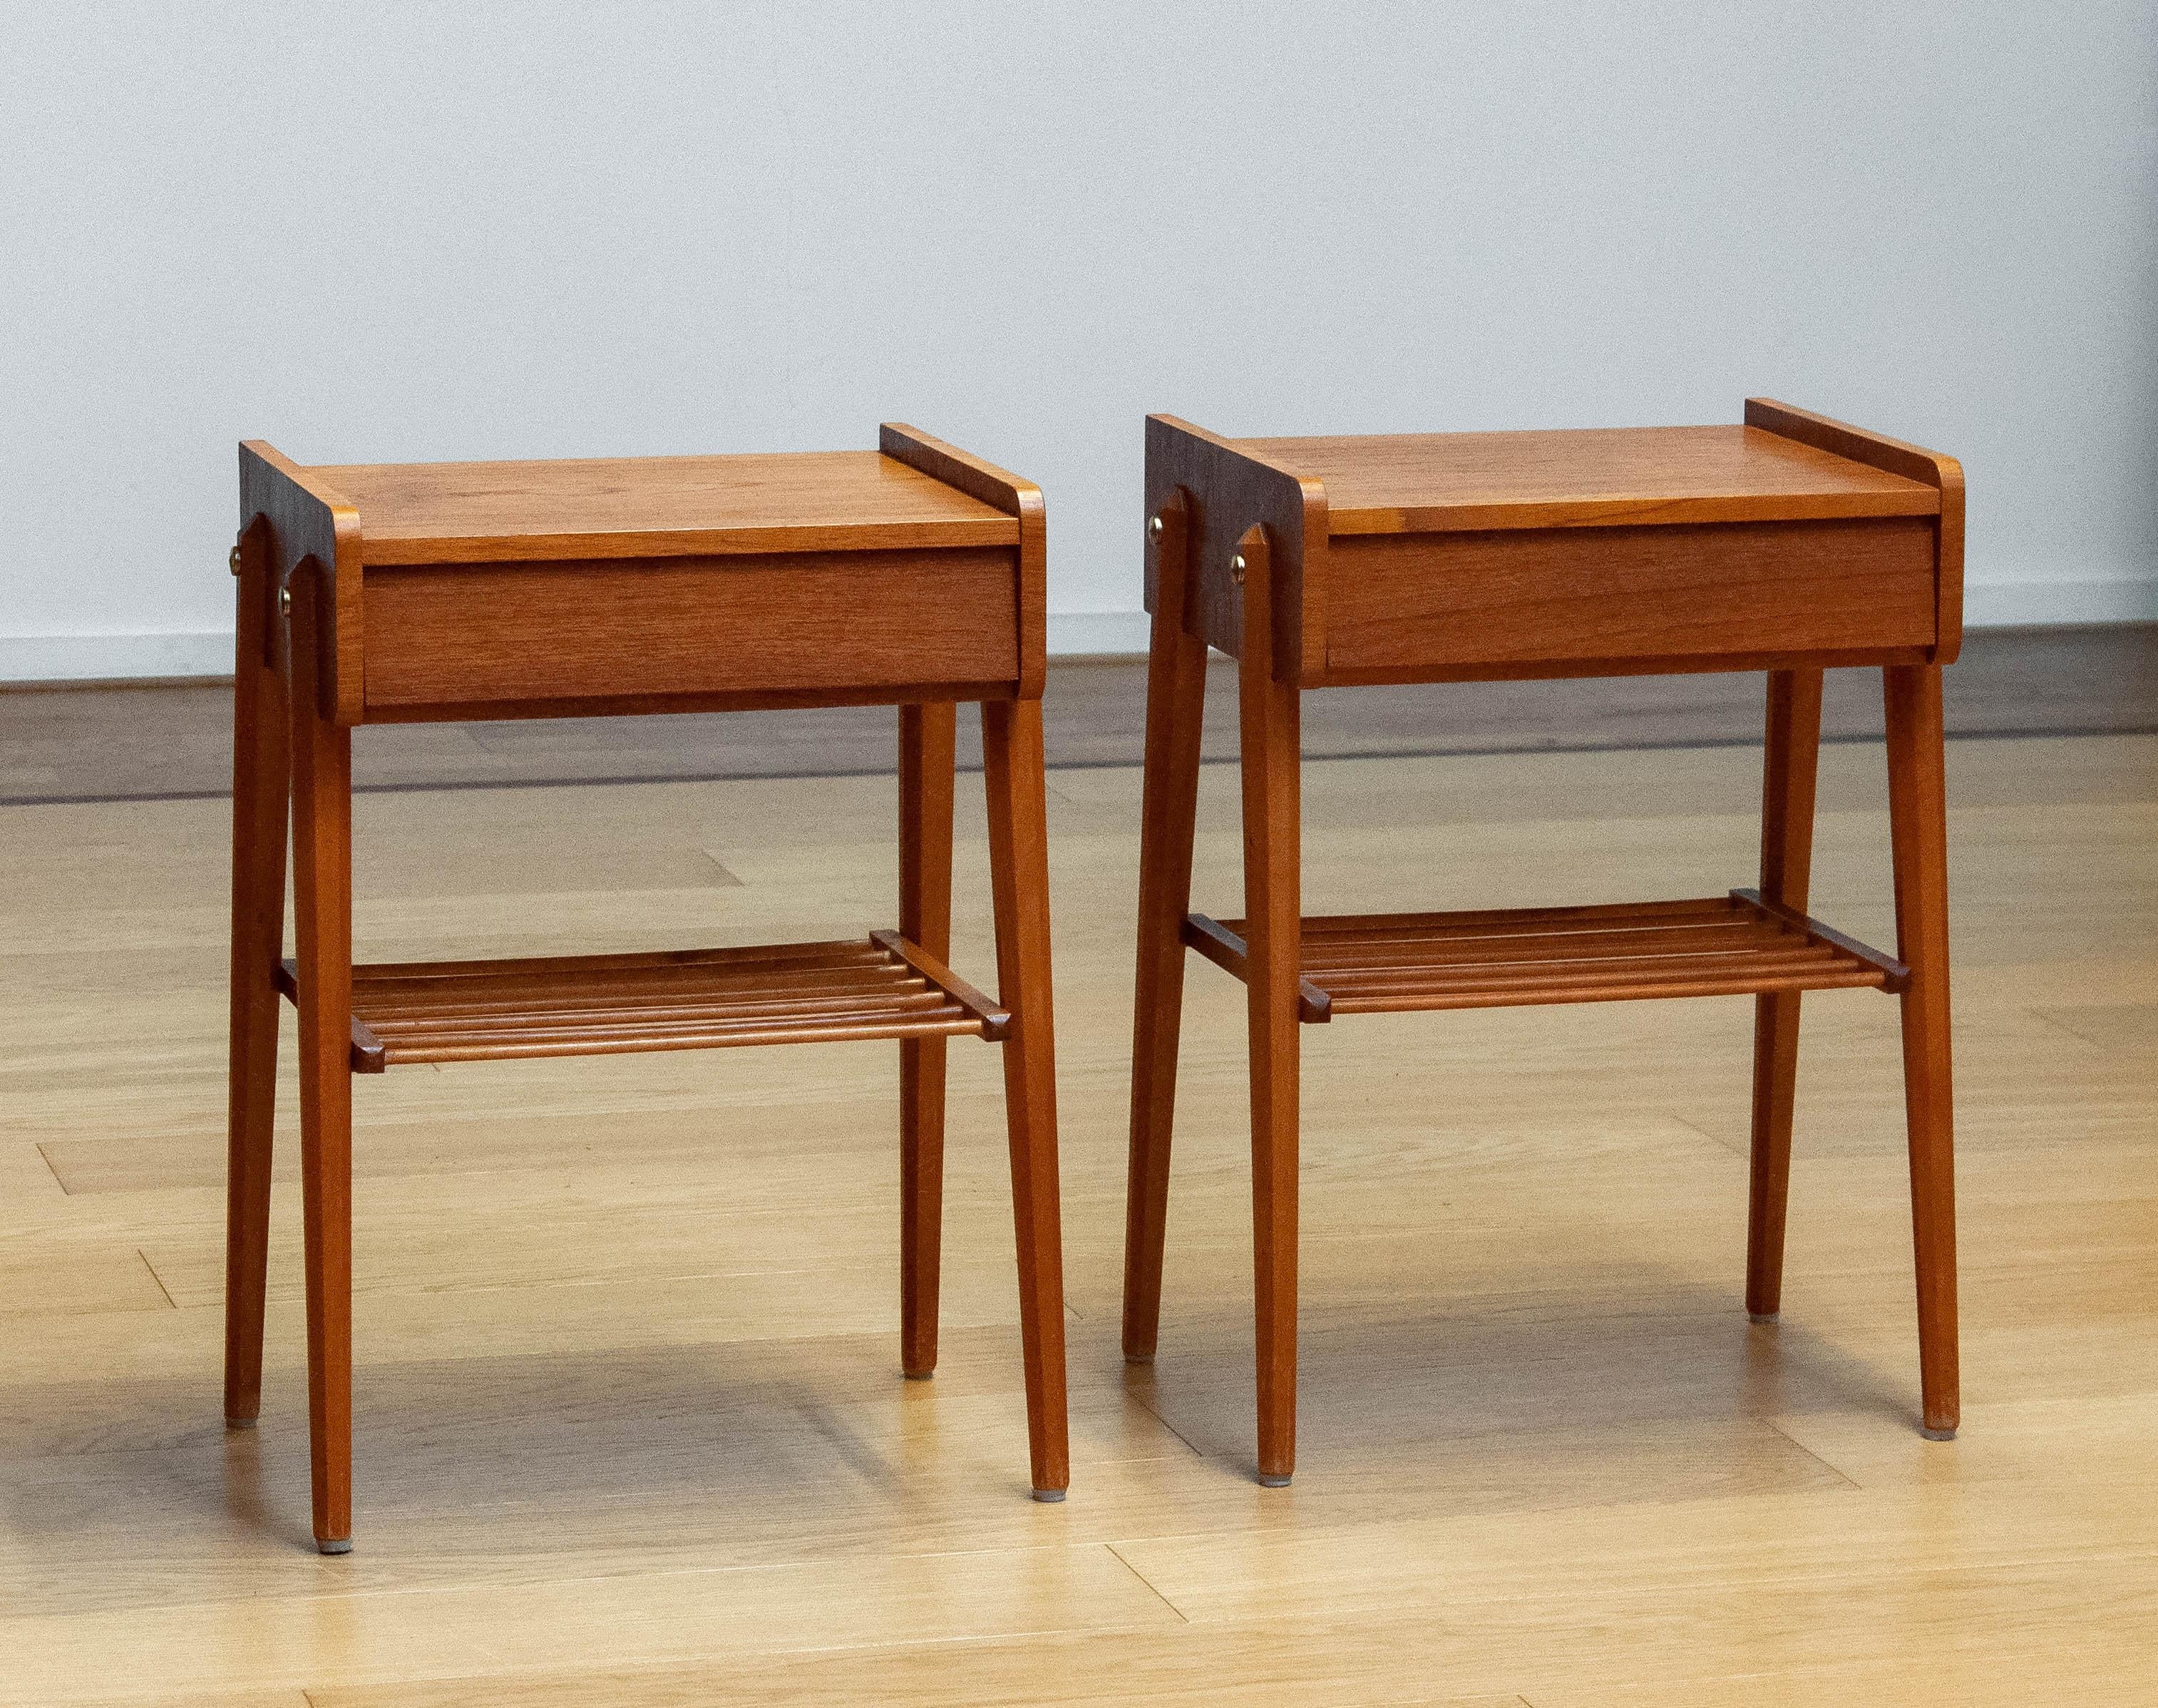 Scandinavian modern teak nightstands from the mid 20th century. The pair are designed and made in Sweden and have a single large drawer as well as a ribbed shelf. A decorative detail is the brass hardware. Marked AB BJÄRNI Bjärnum which is a Swedish